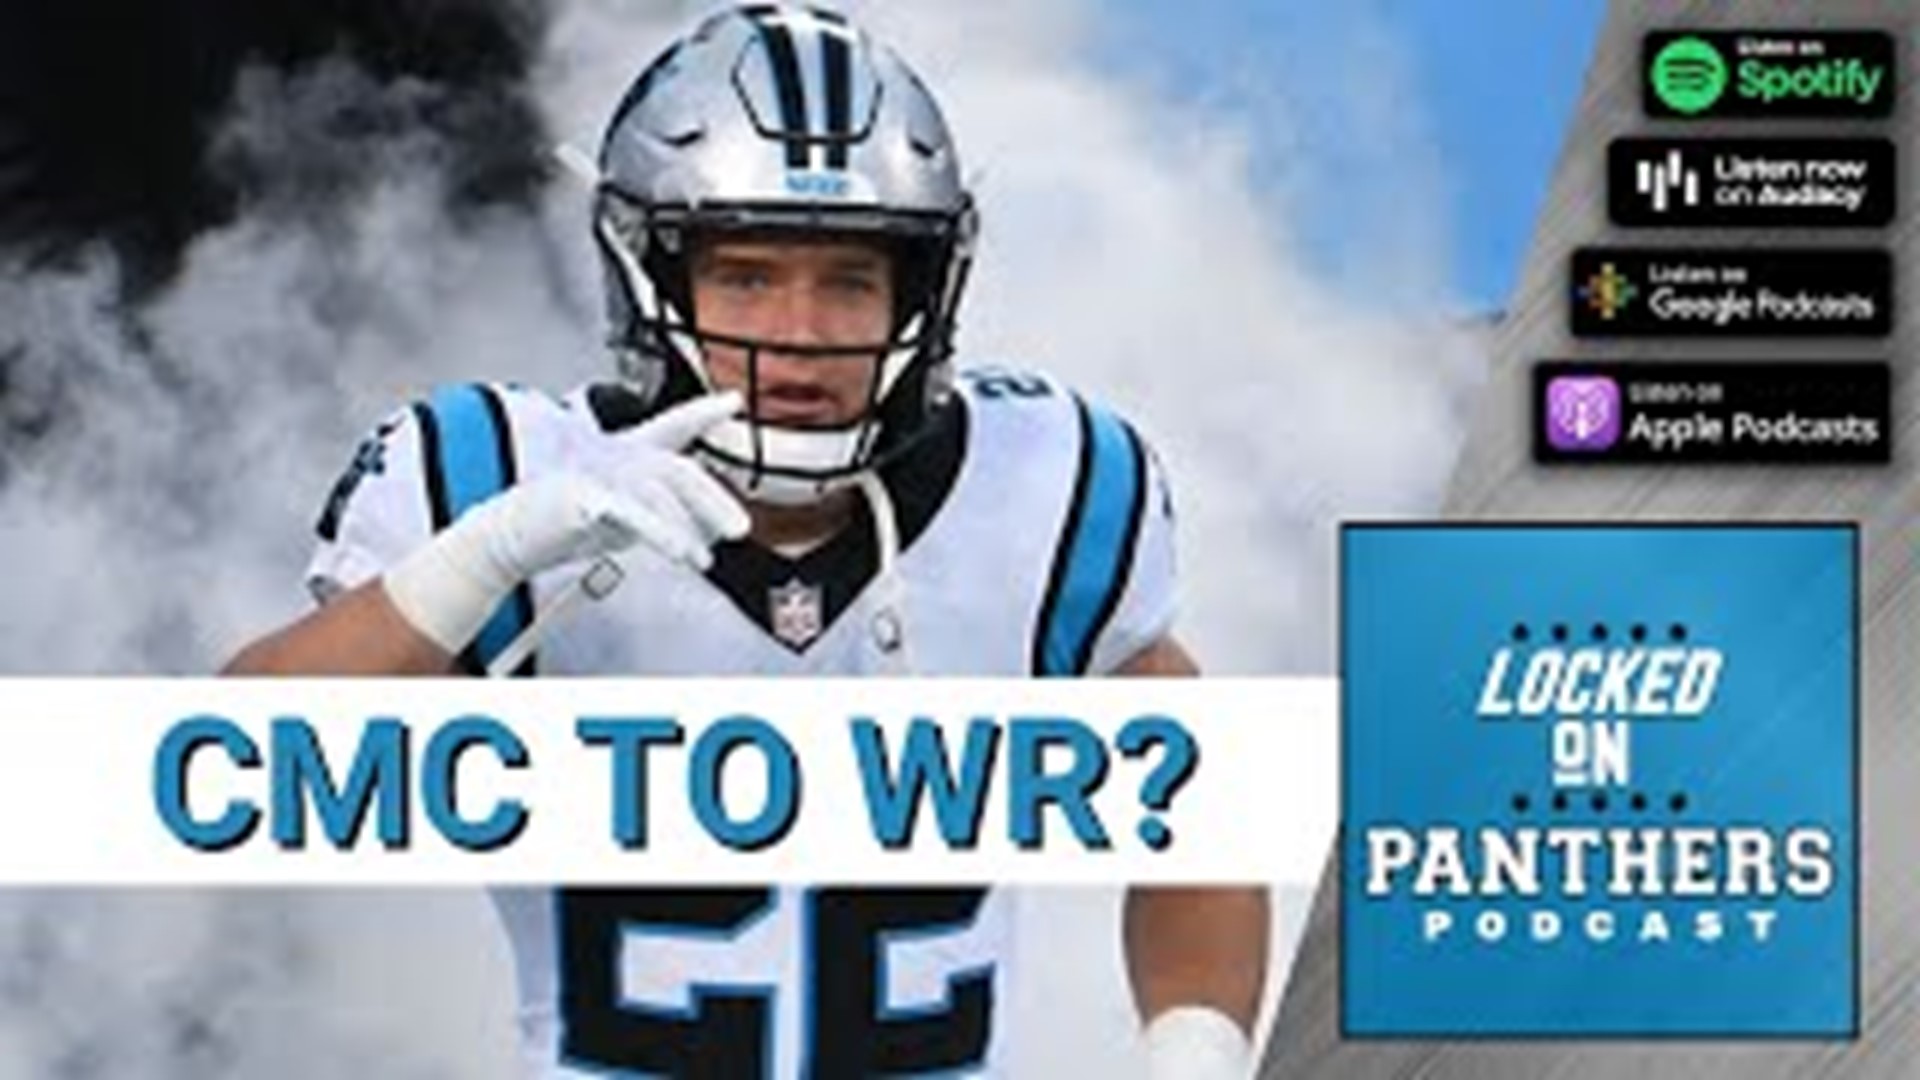 Julian Council once again took the time to answer listener questions with another edition of the Weekly Friday Mailbag. That and more on Locked On Panthers!